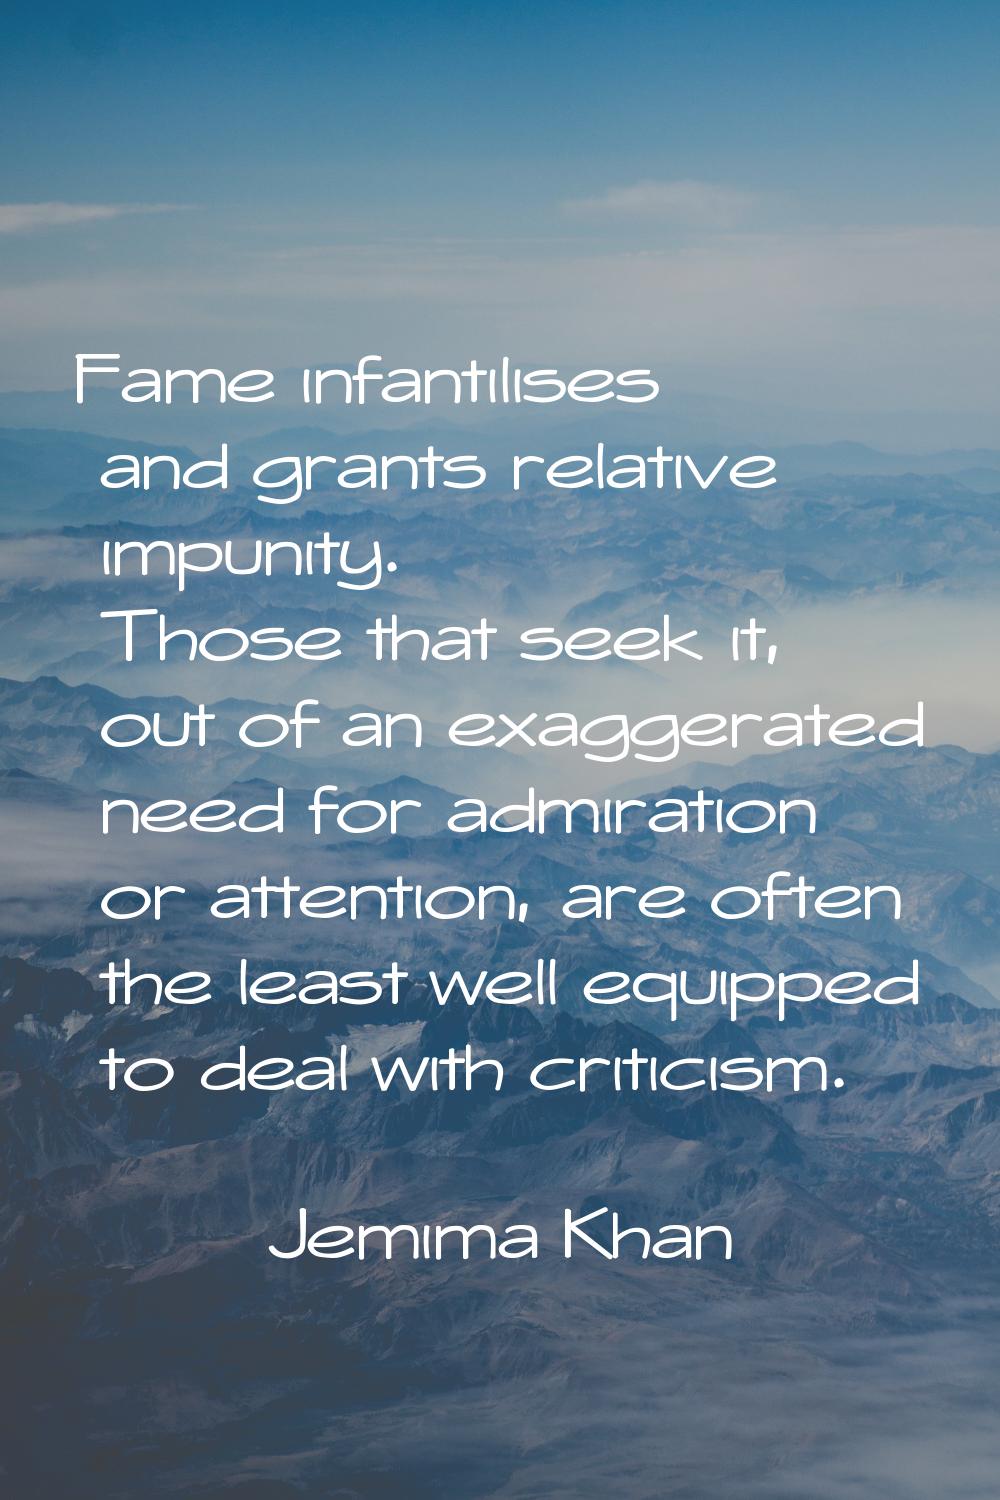 Fame infantilises and grants relative impunity. Those that seek it, out of an exaggerated need for 